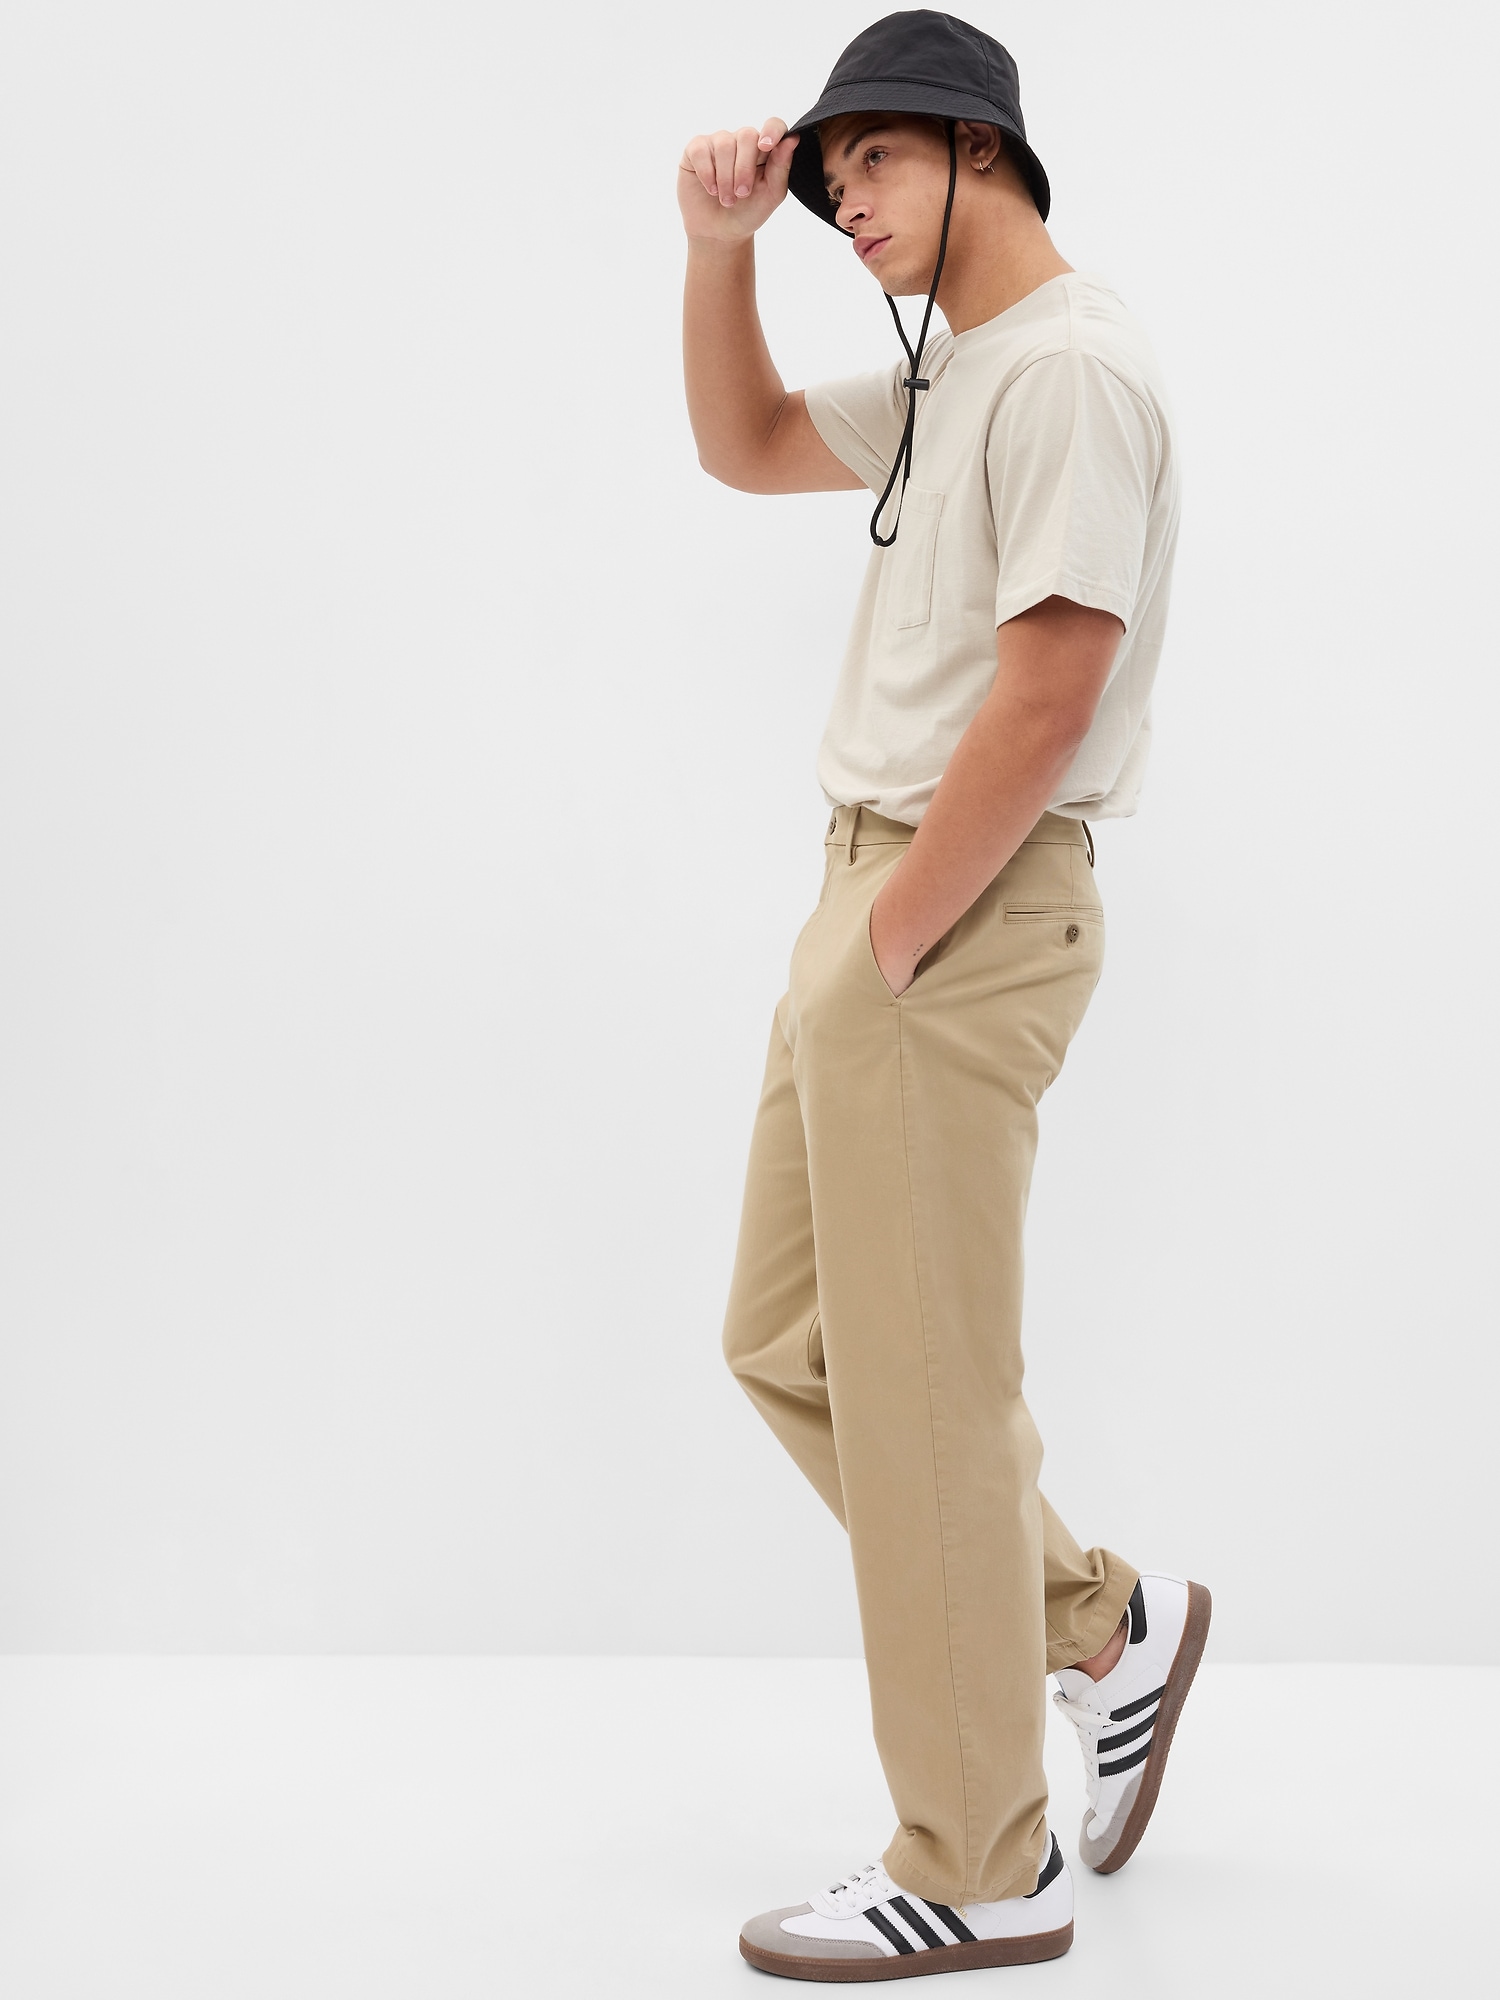 Modern Khakis in Baggy Fit with GapFlex | Gap